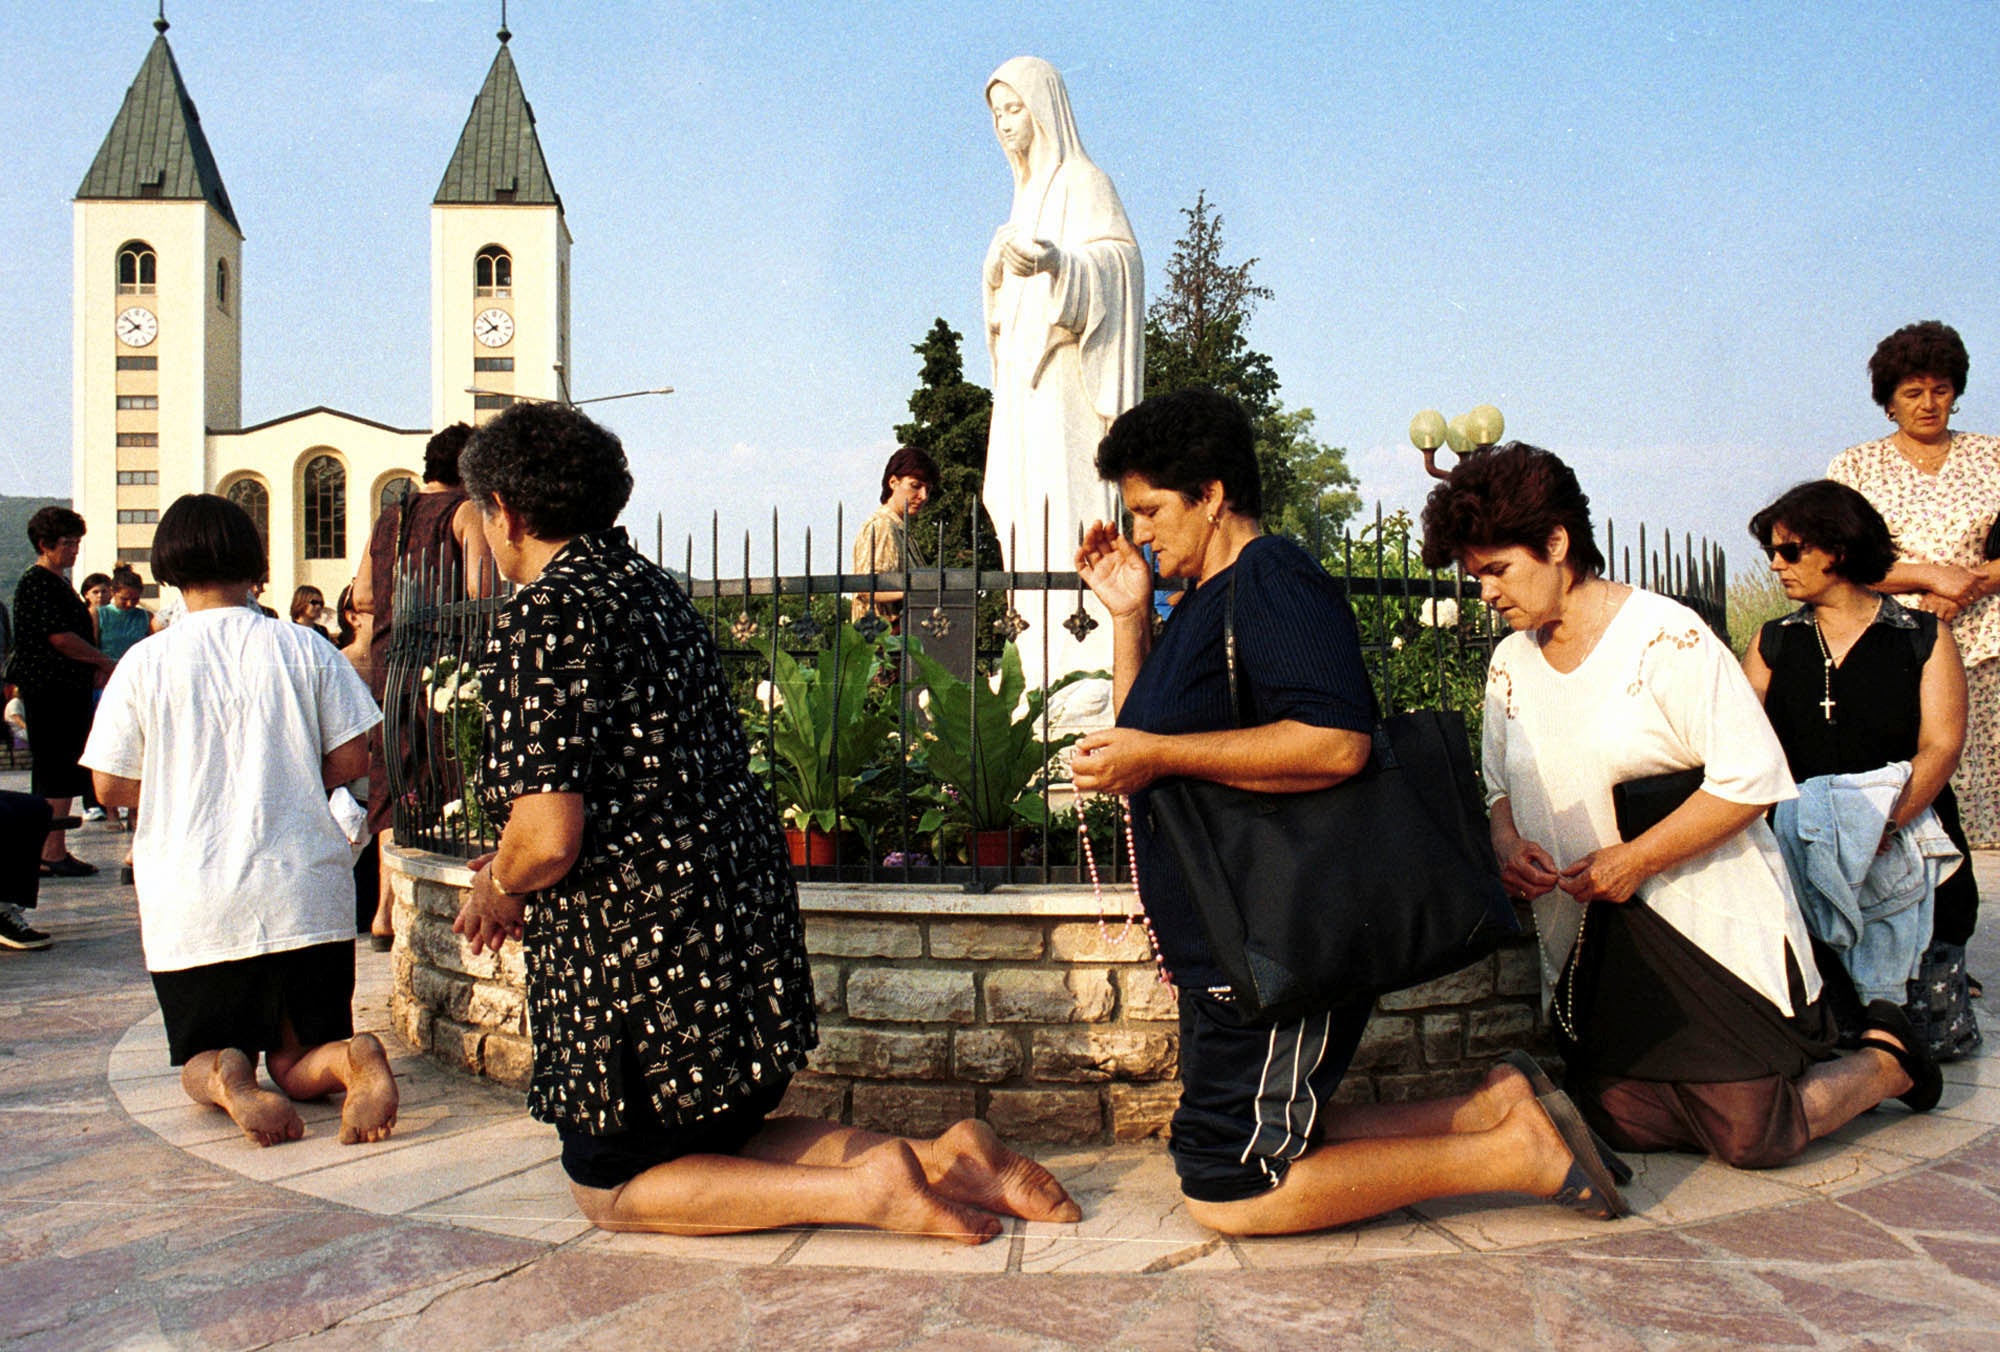 Bosnian Roman Catholic women pray on the occasion of the feast of the Assumption in Medjugorje